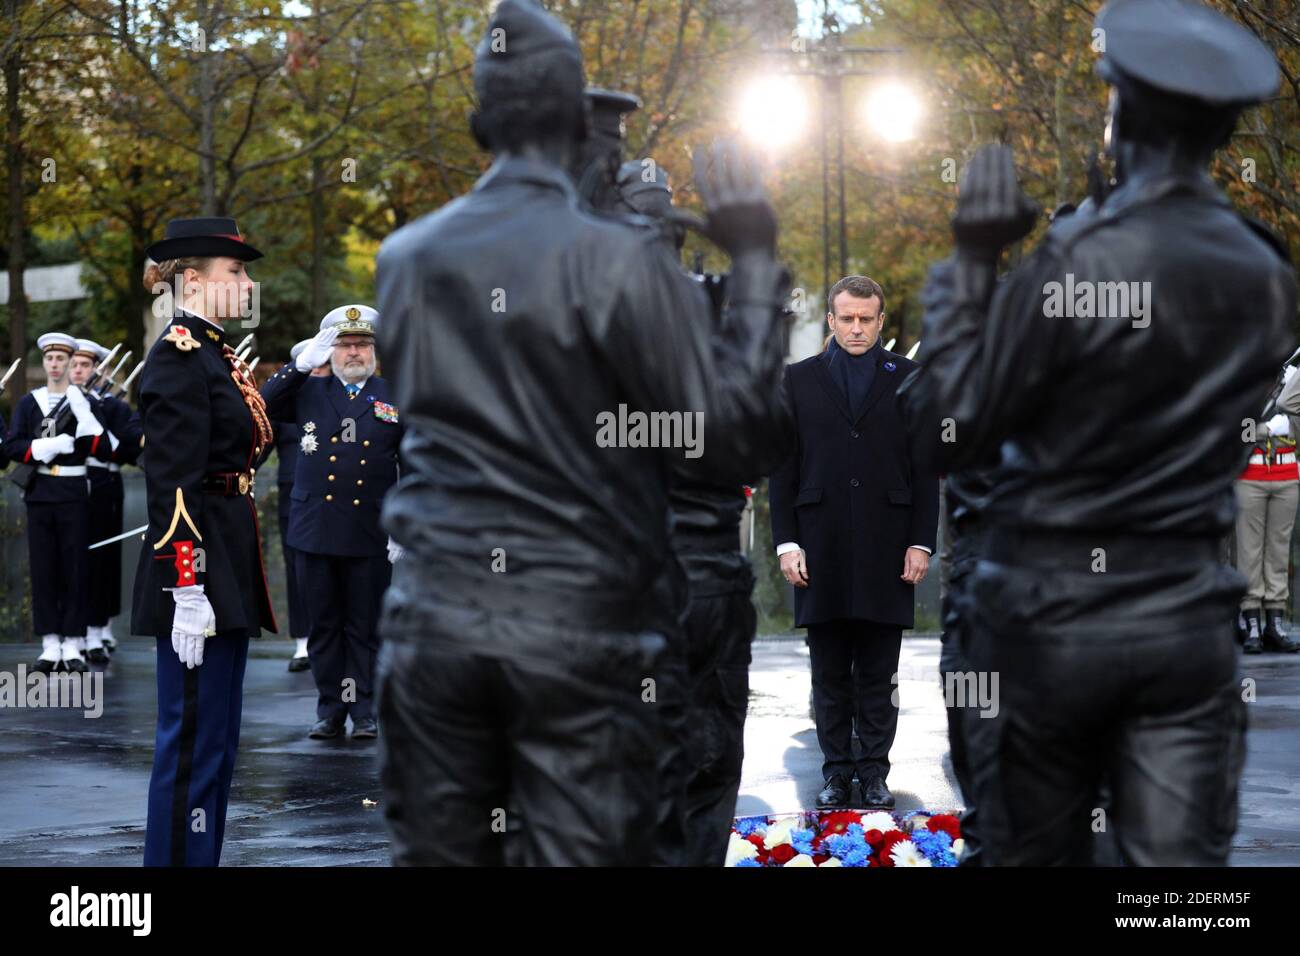 French President Emmanuel Macron at the official inauguration of the 'Monument aux morts pour la France en operations exterieures' (OPEX) by French artist Stephane Vigny on November 11, 2019 in the Eugenie-Djendi garden in Paris, France, as part of commemorations marking the 101st anniversary of the 11 November 1918 armistice, ending World War I. Photo by Stephane Lemouton/Pool/ABACAPRESS.COM Stock Photo